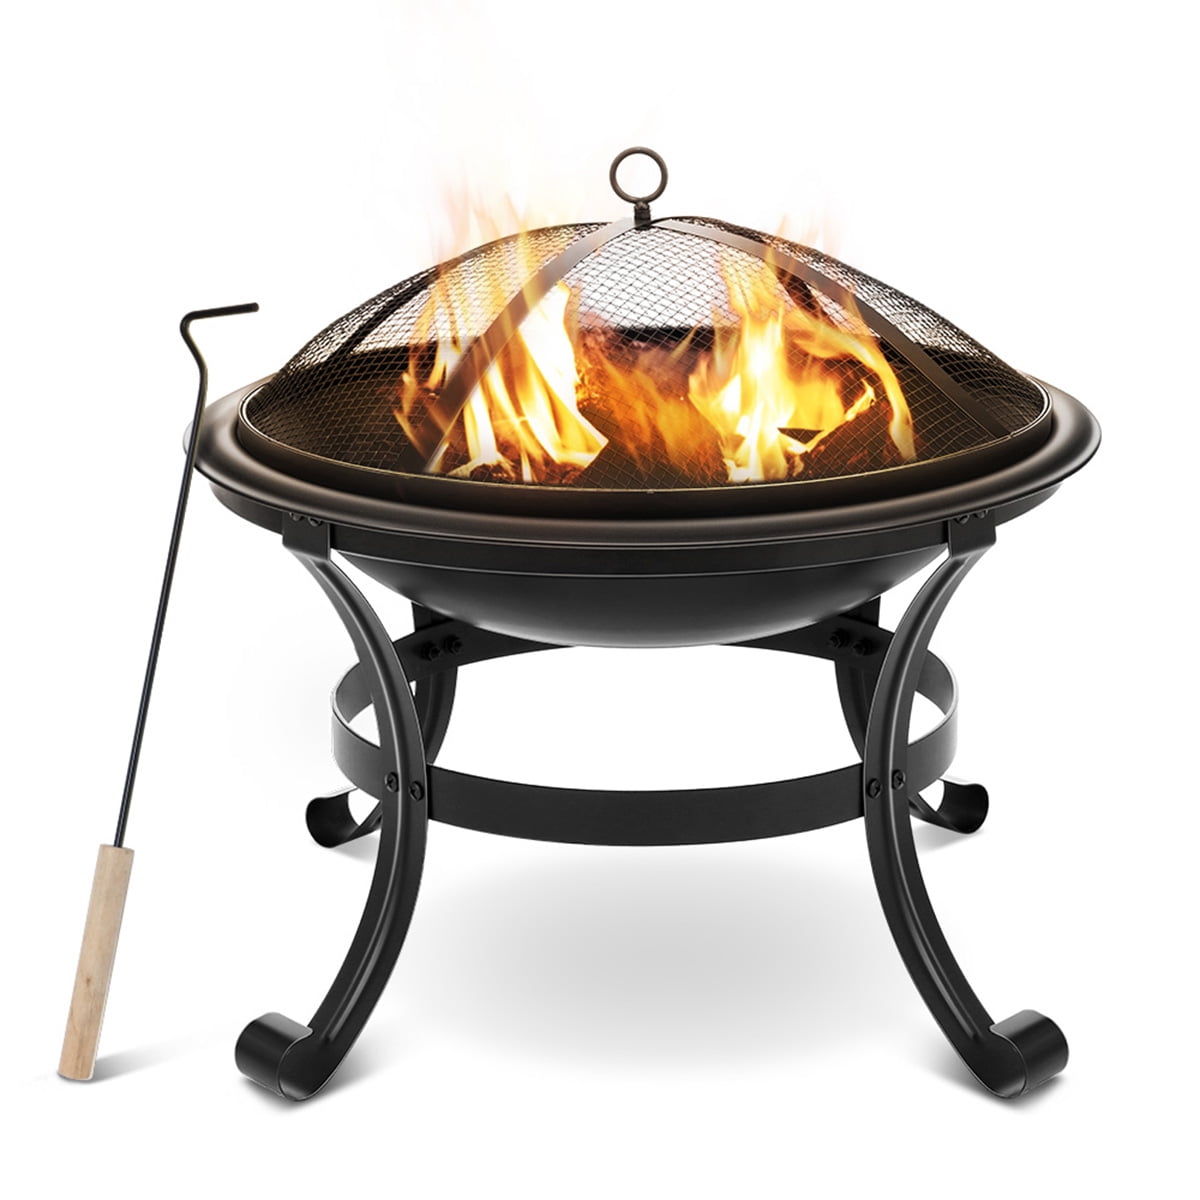 22 Fire Pits Bowl Outdoor, Stainless Steel Wood Burning Fire Pit